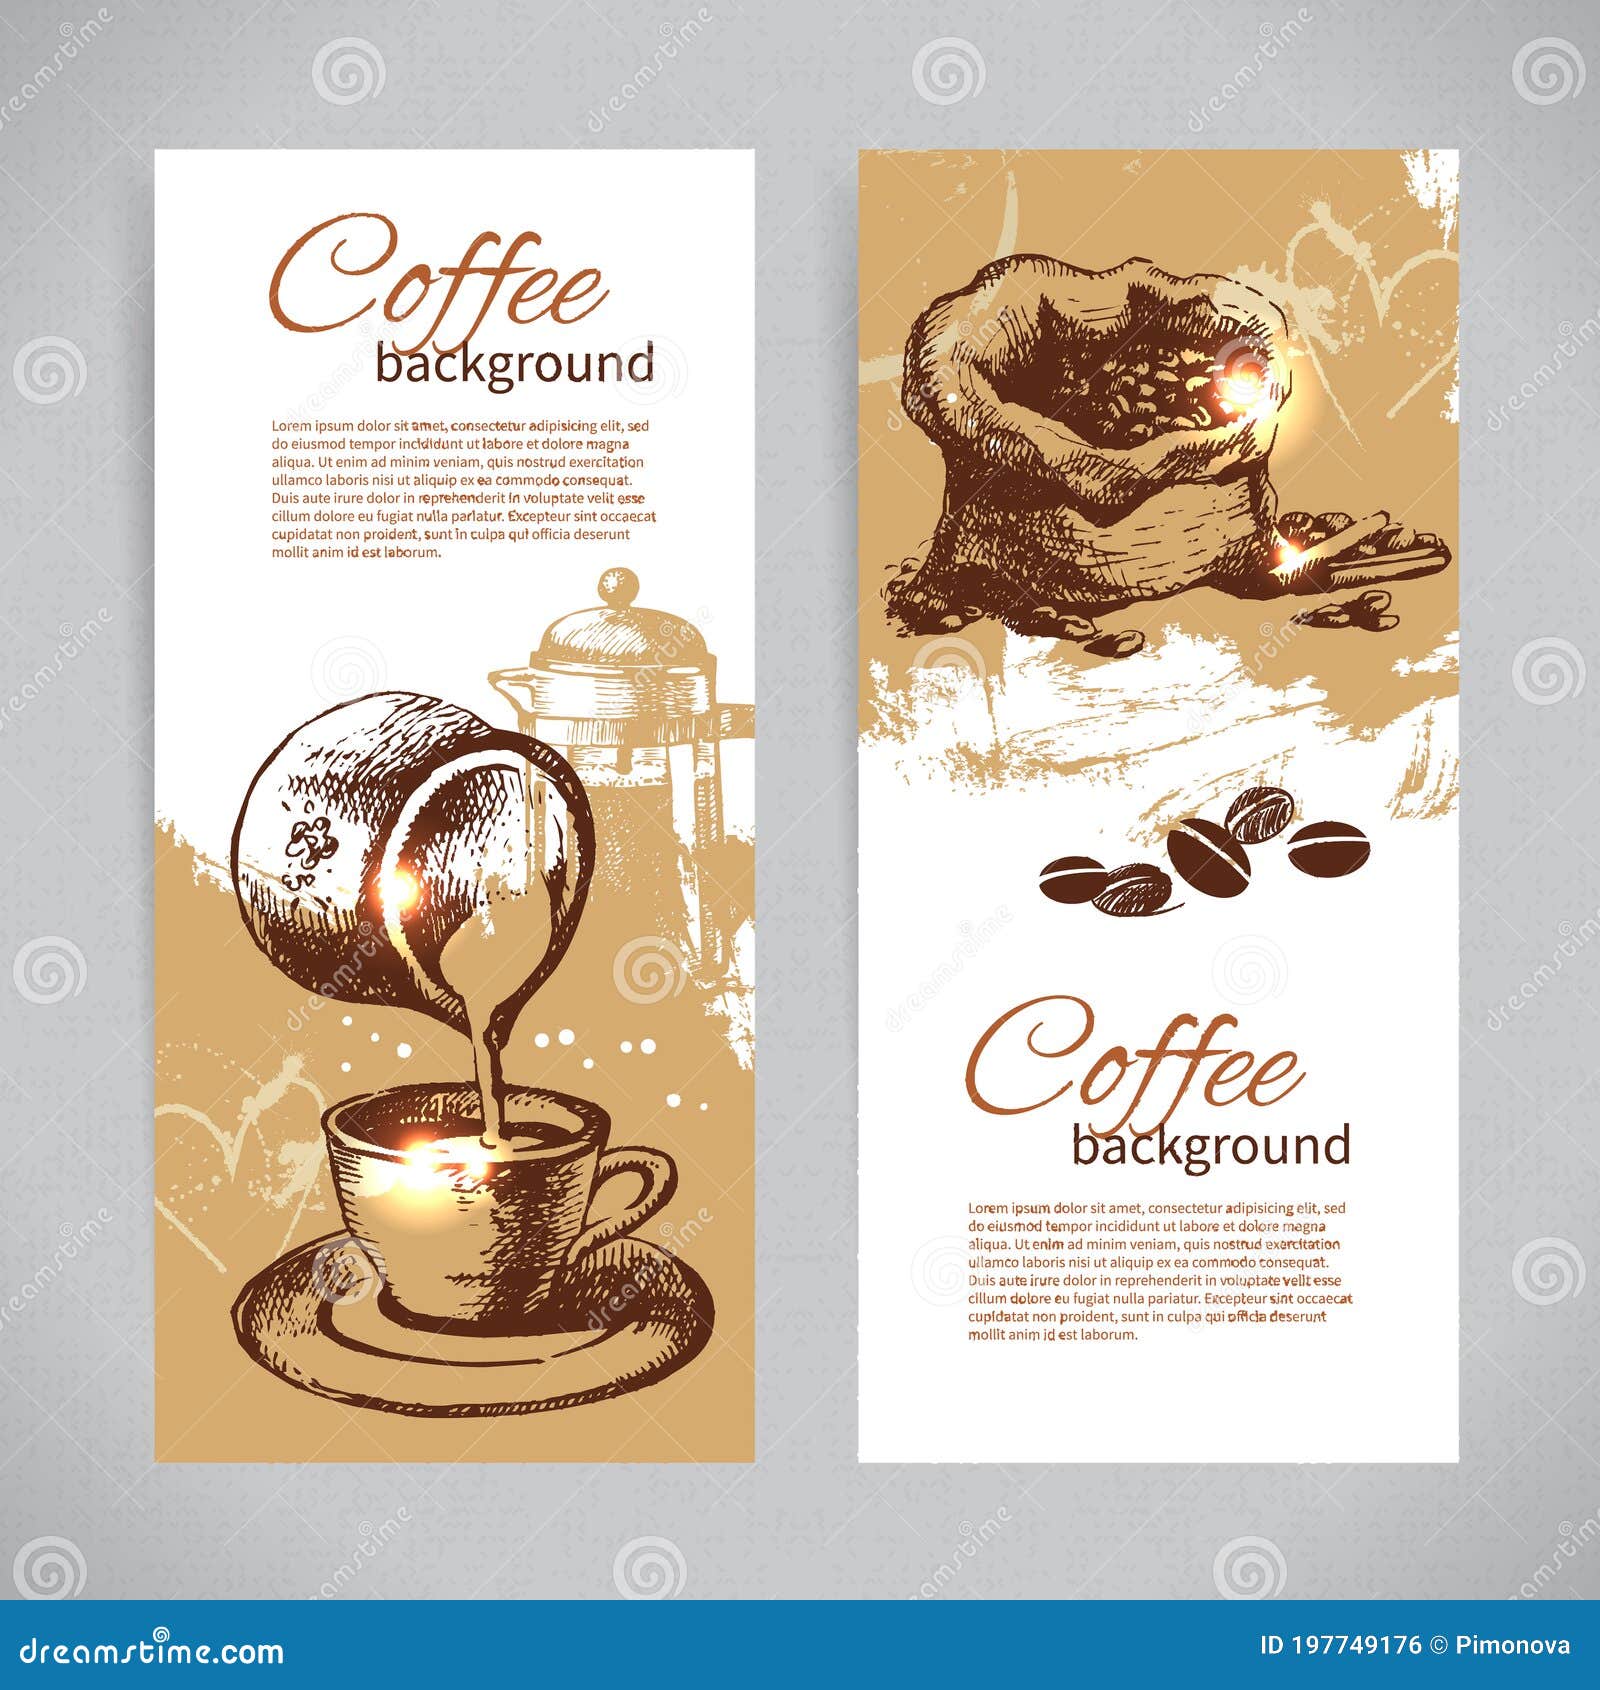 Banner Set of Vintage Coffee Backgrounds. Menu for Restaurant, Cafe, Bar,  Coffeehouse Stock Vector - Illustration of drawn, cafe: 197749176